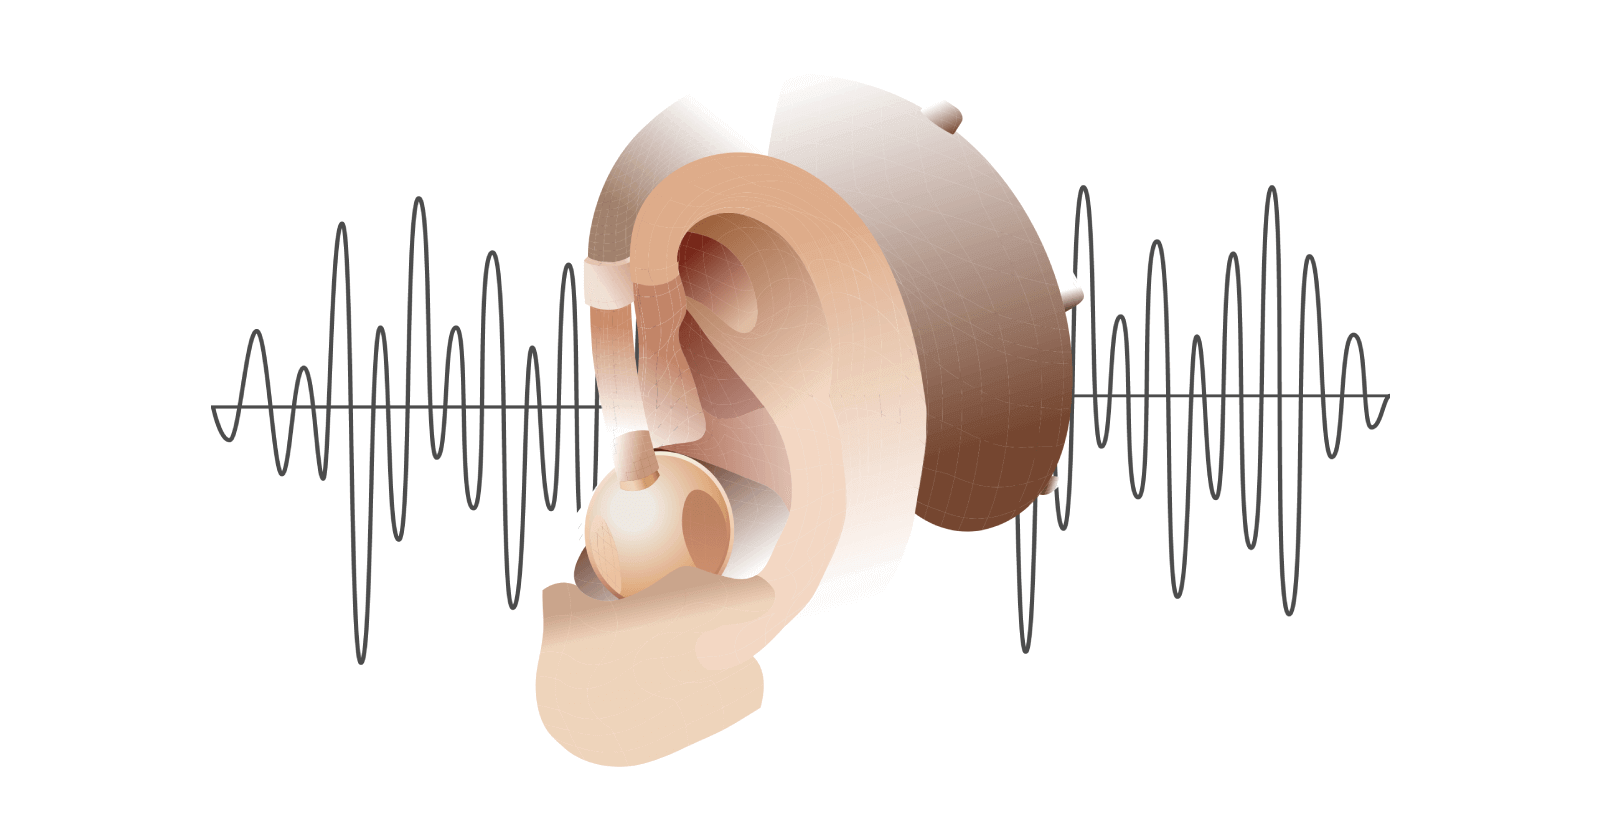 Does medical insurance cover hearing aids?